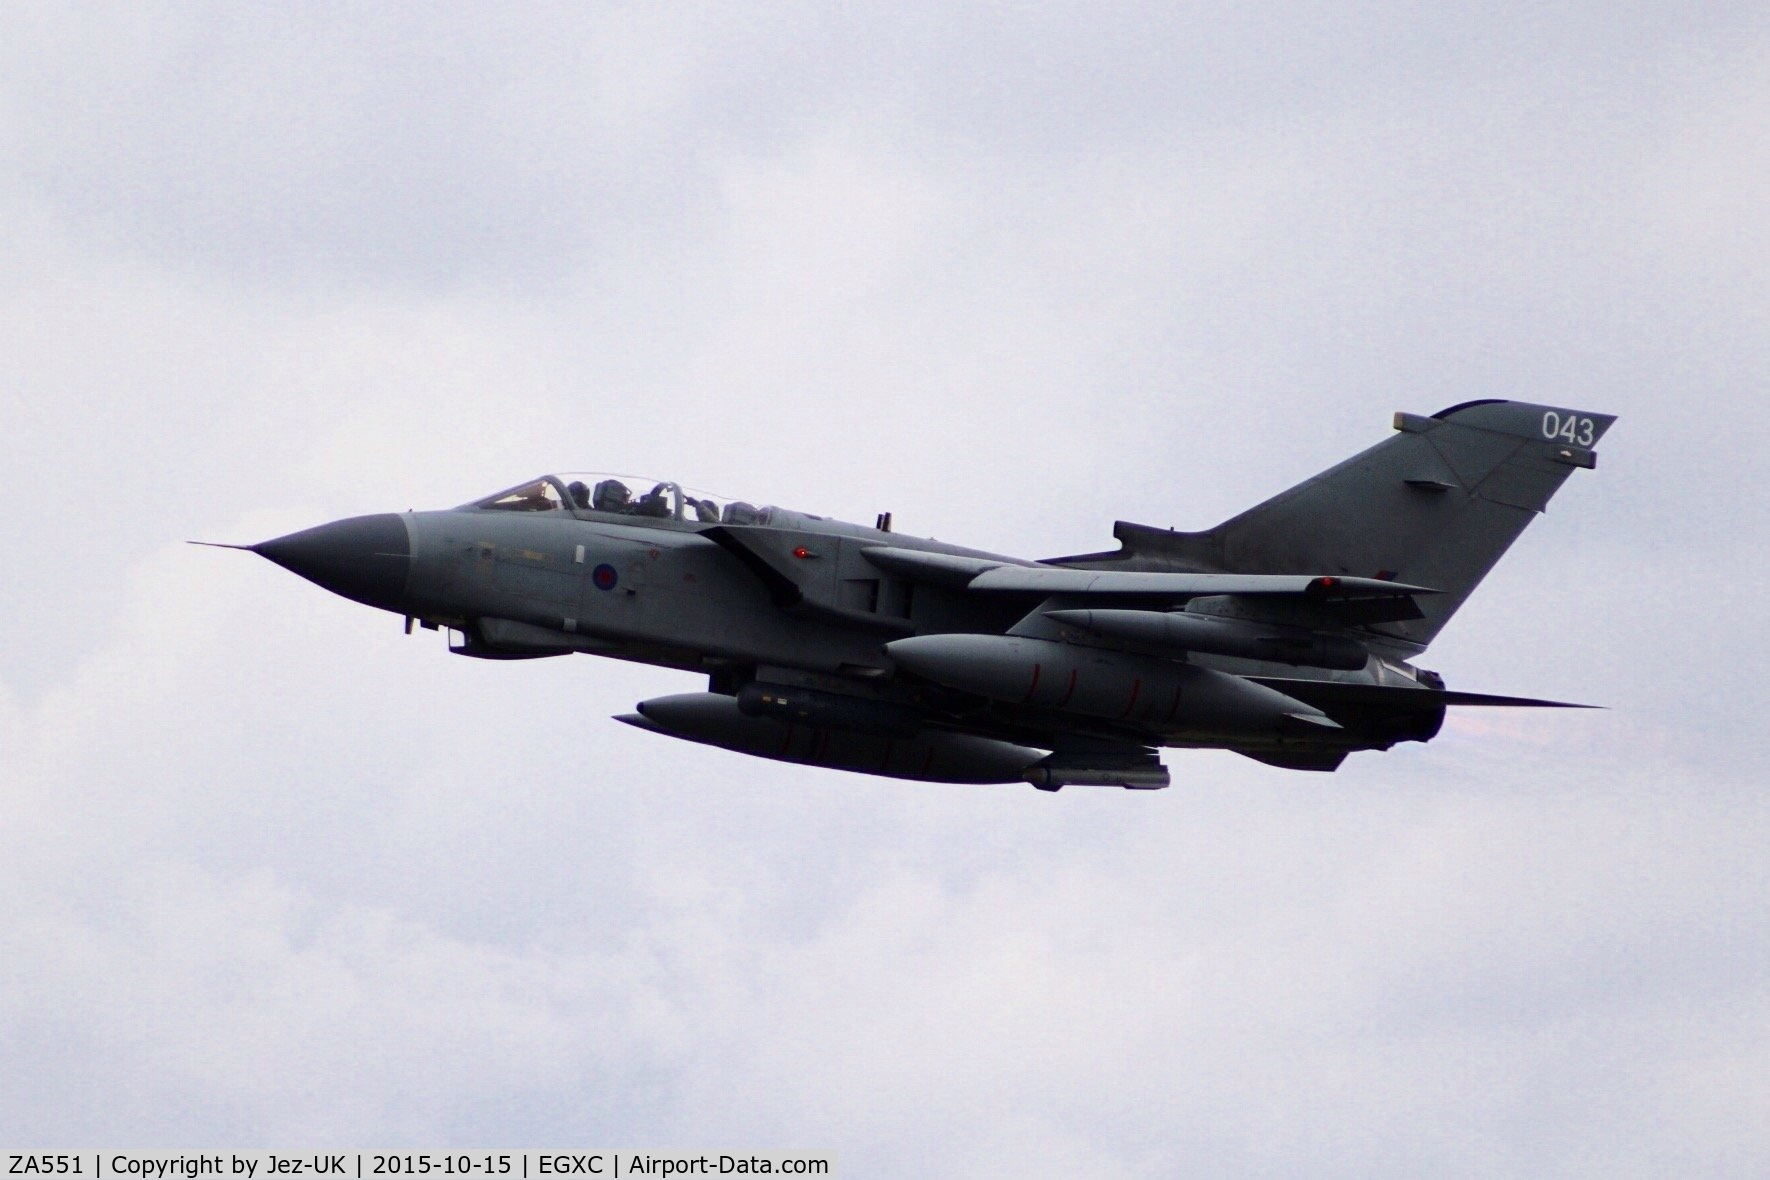 ZA551, 1981 Panavia Tornado GR.4 C/N 067/BT018/3035, had to be quick to get this, was straight off runway 07/25, code 043,